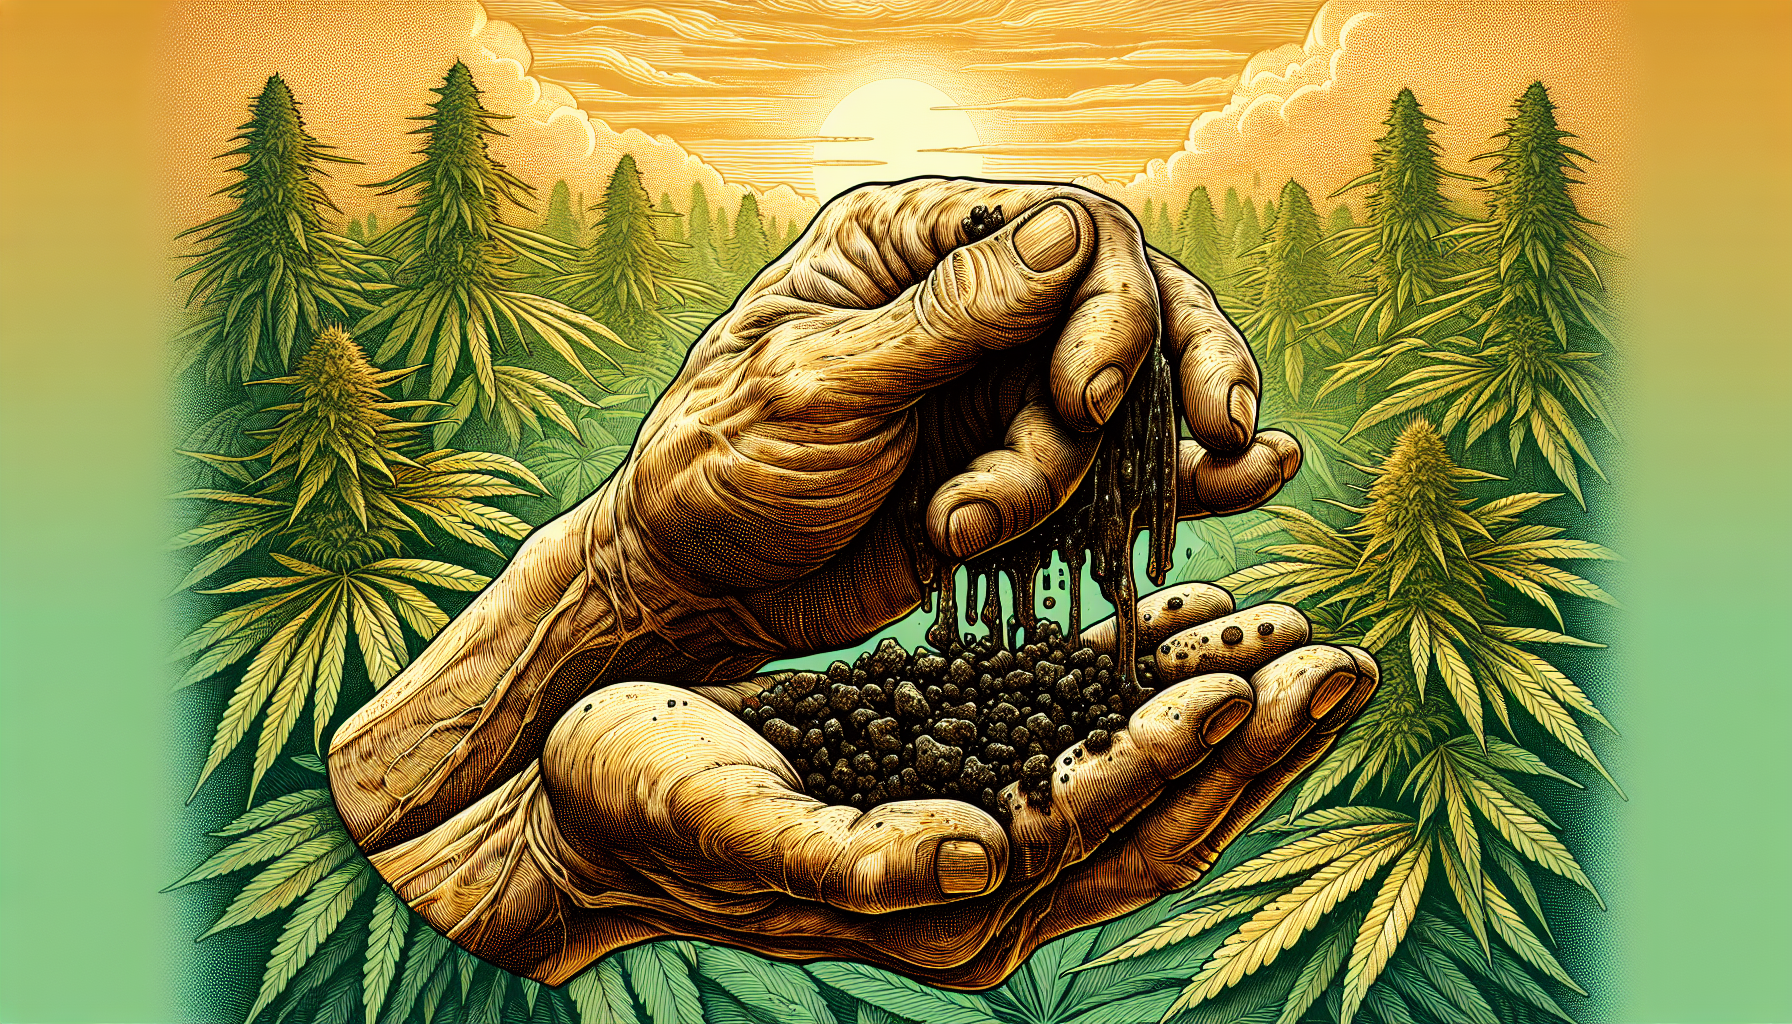 Illustration of traditional hand-rolling method for hash production